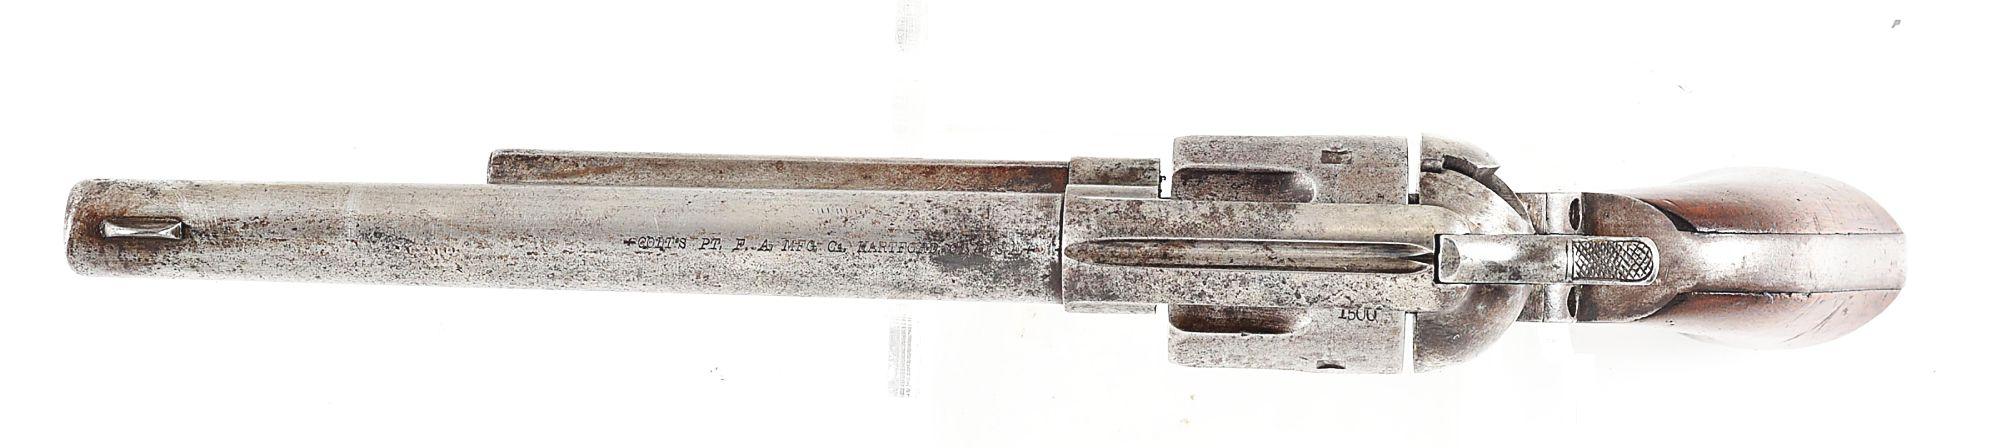 (A) AINSWORTH INSPECTED COLT SINGLE ACTION ARMY REVOLVER WITH KOPEC LETTER.